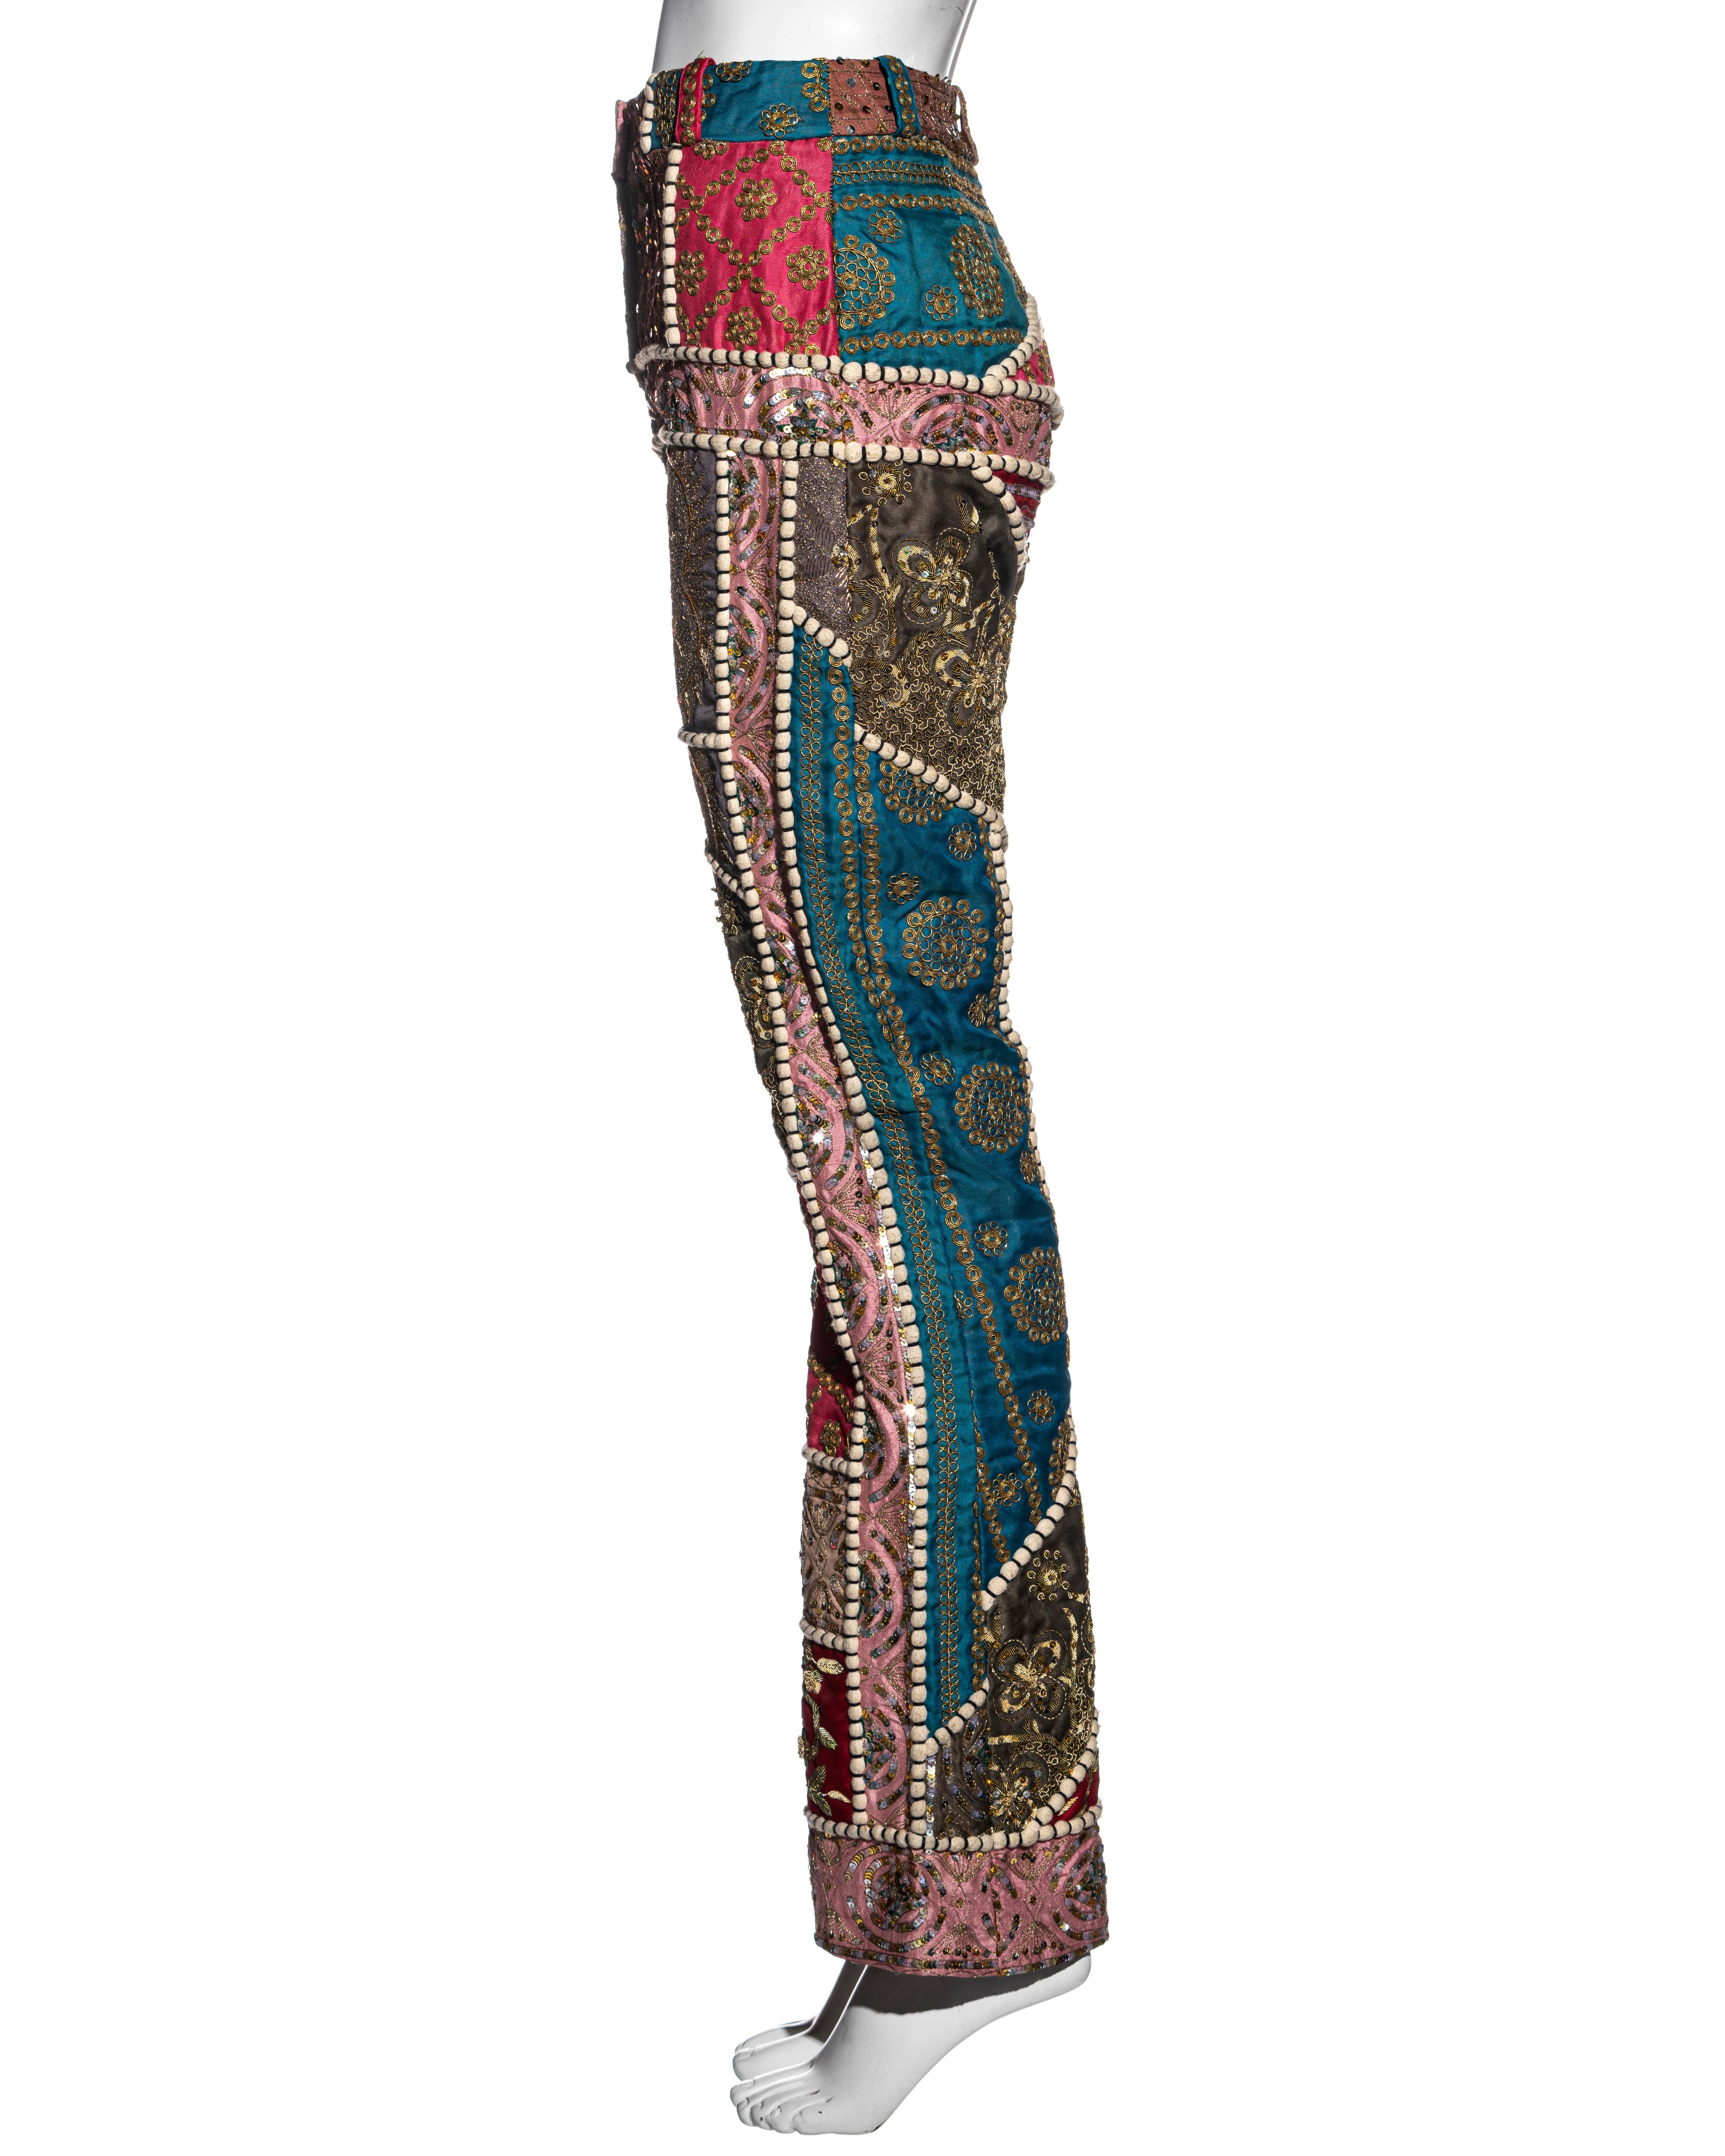 Gianfranco Ferre raw silk patchwork embroidered pants, ss 2002 For Sale 3